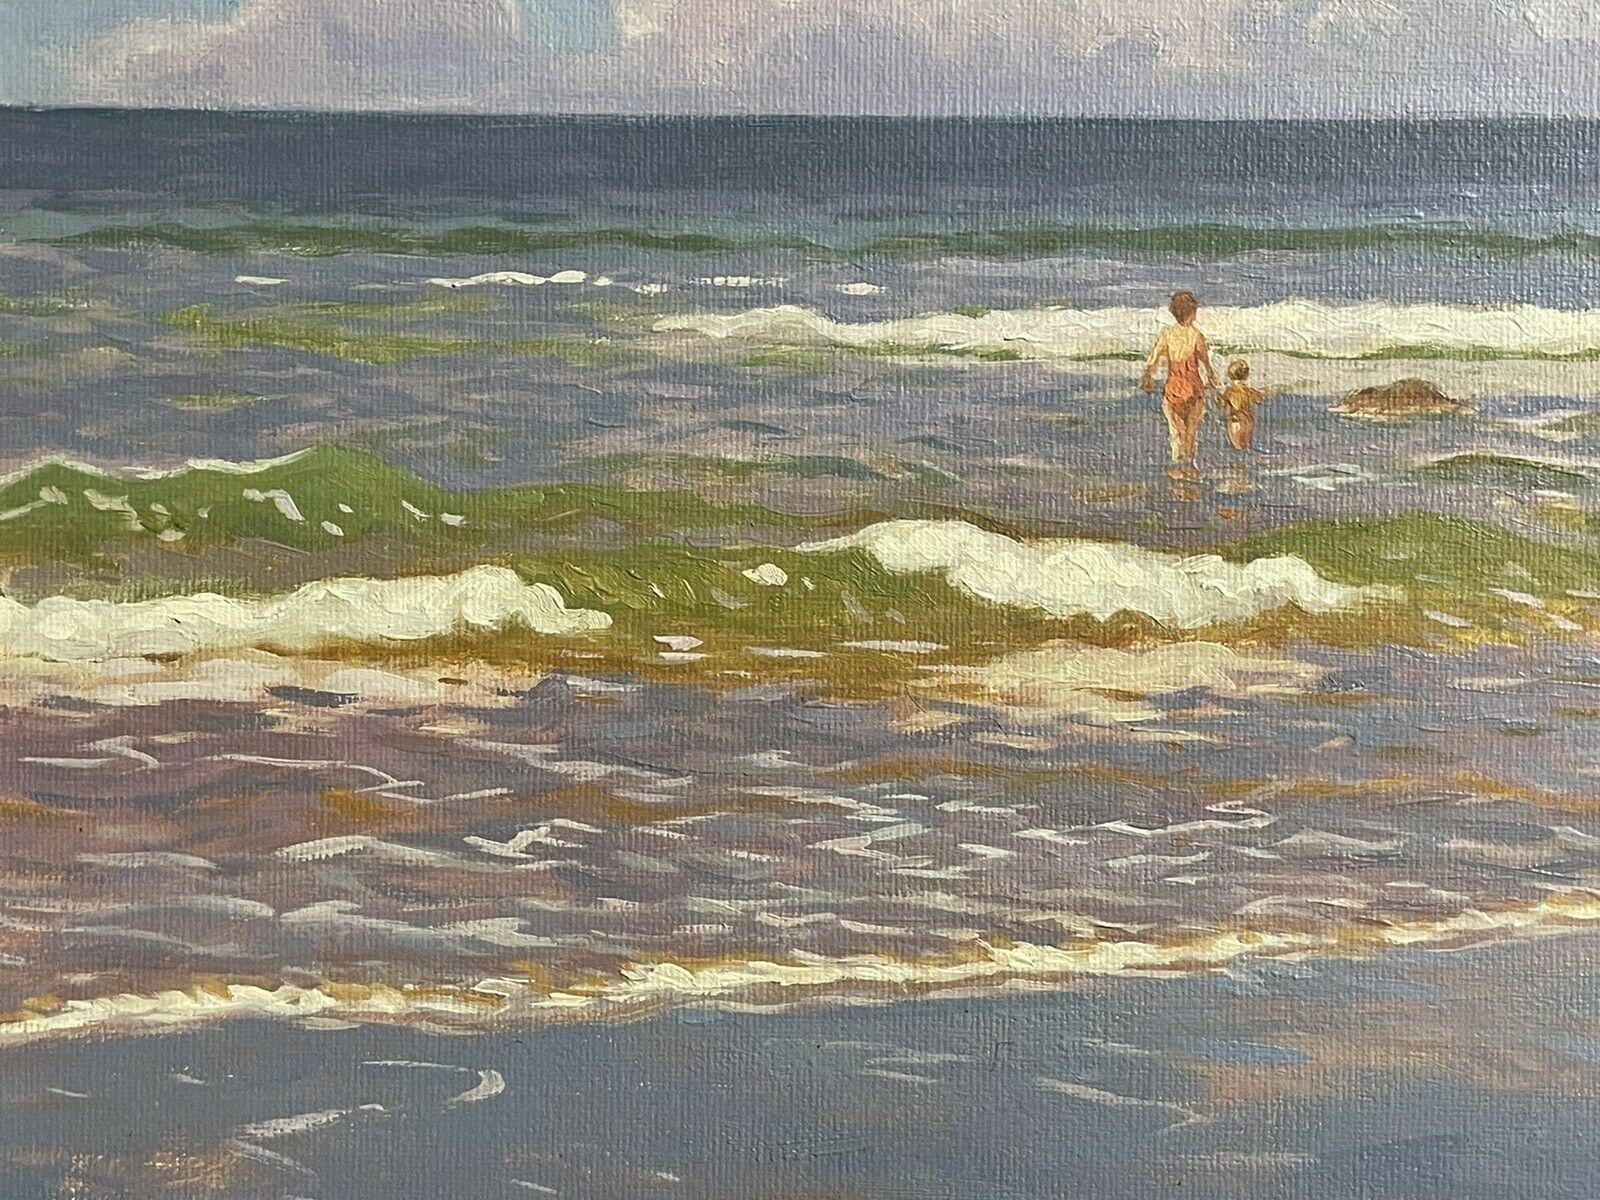 FINE MODERN BRITISH SIGNED OIL PAINTING - CHILDREN PLAYING IN SURF ON BEACH - Gray Figurative Painting by M. Clark